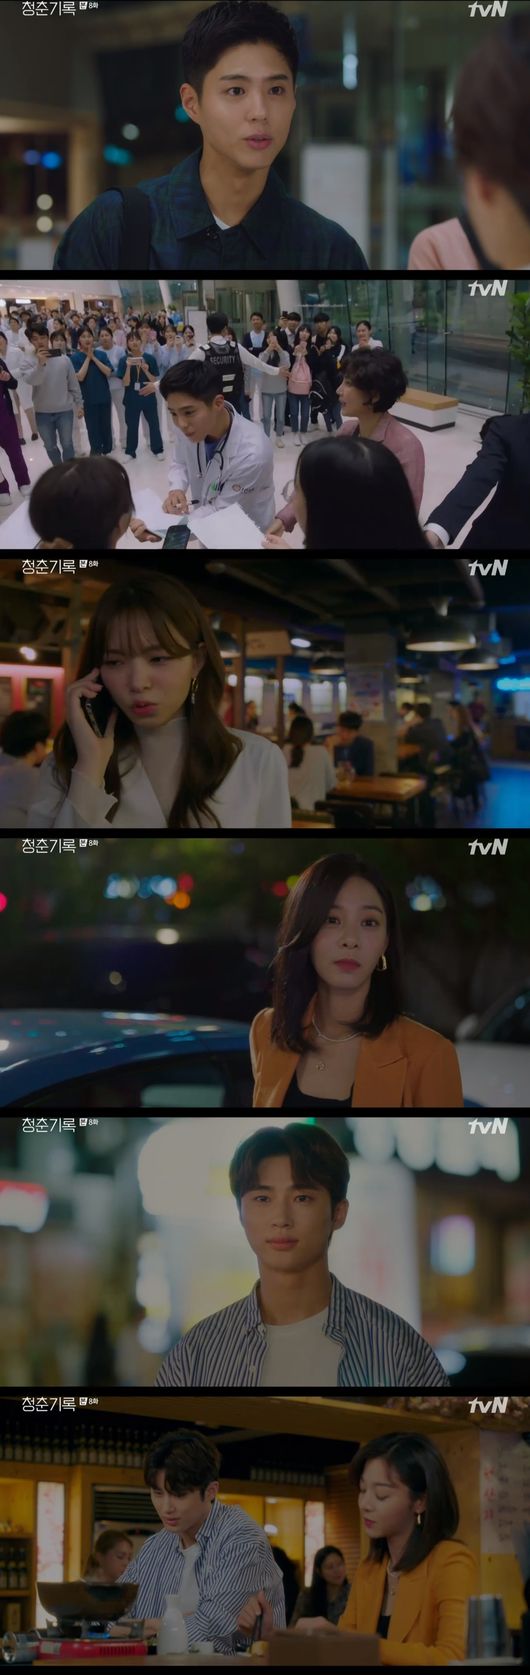 Park Bo-gum becomes Rising Star with Drama Hit the jackpot!In TVN Record of Youth broadcast on the 29th, Park Bo-gum became a rising star when Drama became Hit the jackpot!Sa Hye-joon hit Hit the jackpot! on Drama Gateway and became a rising star one morning. Sa Hye-joon had a celebration meeting with Friends.This is what Sa Hye-joons former woman, Friend Jeong Ji-a (Seol In-ah), learned, and Jeong Ji-a said she would go to the meeting using Won Hae-hyo (Byeon Woo-seok)s brother, Won Hae-na (Cho Yu-jeong).Won Hae Hyo knew this and met Jeong Ji-a in advance.Jeong Ji-a told Won Hae-hyo, Do you like Hye-joons Friend? I am worried that I will go to the place and hurt her.Friend Women Friend Where is the intellectual quality on my favorite topic? In the end, Jeong Ji-a went to a meeting with Sa Hye-joon. Jeong Ji-a looked at Sa Hye-joon and said, Its been a long time. You went well.So, Sa Hye-joon avoided his position, saying, Its not important, play. But in the meantime, Ahn Jeong-ha (Park So-dam) went home after learning that her mother had come to the company.An Jeong-has mother nagged her when she found out her daughter had quit the company and became a makeup artist. She said, What if you raise her hard?Youre harder than me, you dont like me, he said.My mother is so poor because she lives like that, he said. It is clear that I have been forced to grow up since I was a child.Father, who said he was not realistic and incompetent, is rich now, and I have never thought that he is better than his uncle, Father, who lives with his mother.She said, You are a bitch who ignores her mothers poverty. She will disappear. Live well with your rich father. Eventually, she sat down with tears.The next day, Sa Hye-joon bought a new car and met An Jeong-ha. Sa Hye-joon looked at An Jeong-ha and said, It seemed like a troubled person.Im sorry, I didnt even answer the text in time, Sa Hye-joon told An Jeong-ha.It rained then, and when I saw the rain falling in the stable car, I said, I hated the rain, but now I do not like it.Then, Sa Hye-joon looked at Ahn Jeong-ha and asked, What will happen to us? And then he replied, What do you want to be? Sa Hye-joon warmly told Ahn Jeong-ha, I love you.On this day, the two of them gathered pleasant memories and re-confirmed their strong love. : TVN Record of Youth broadcast capture